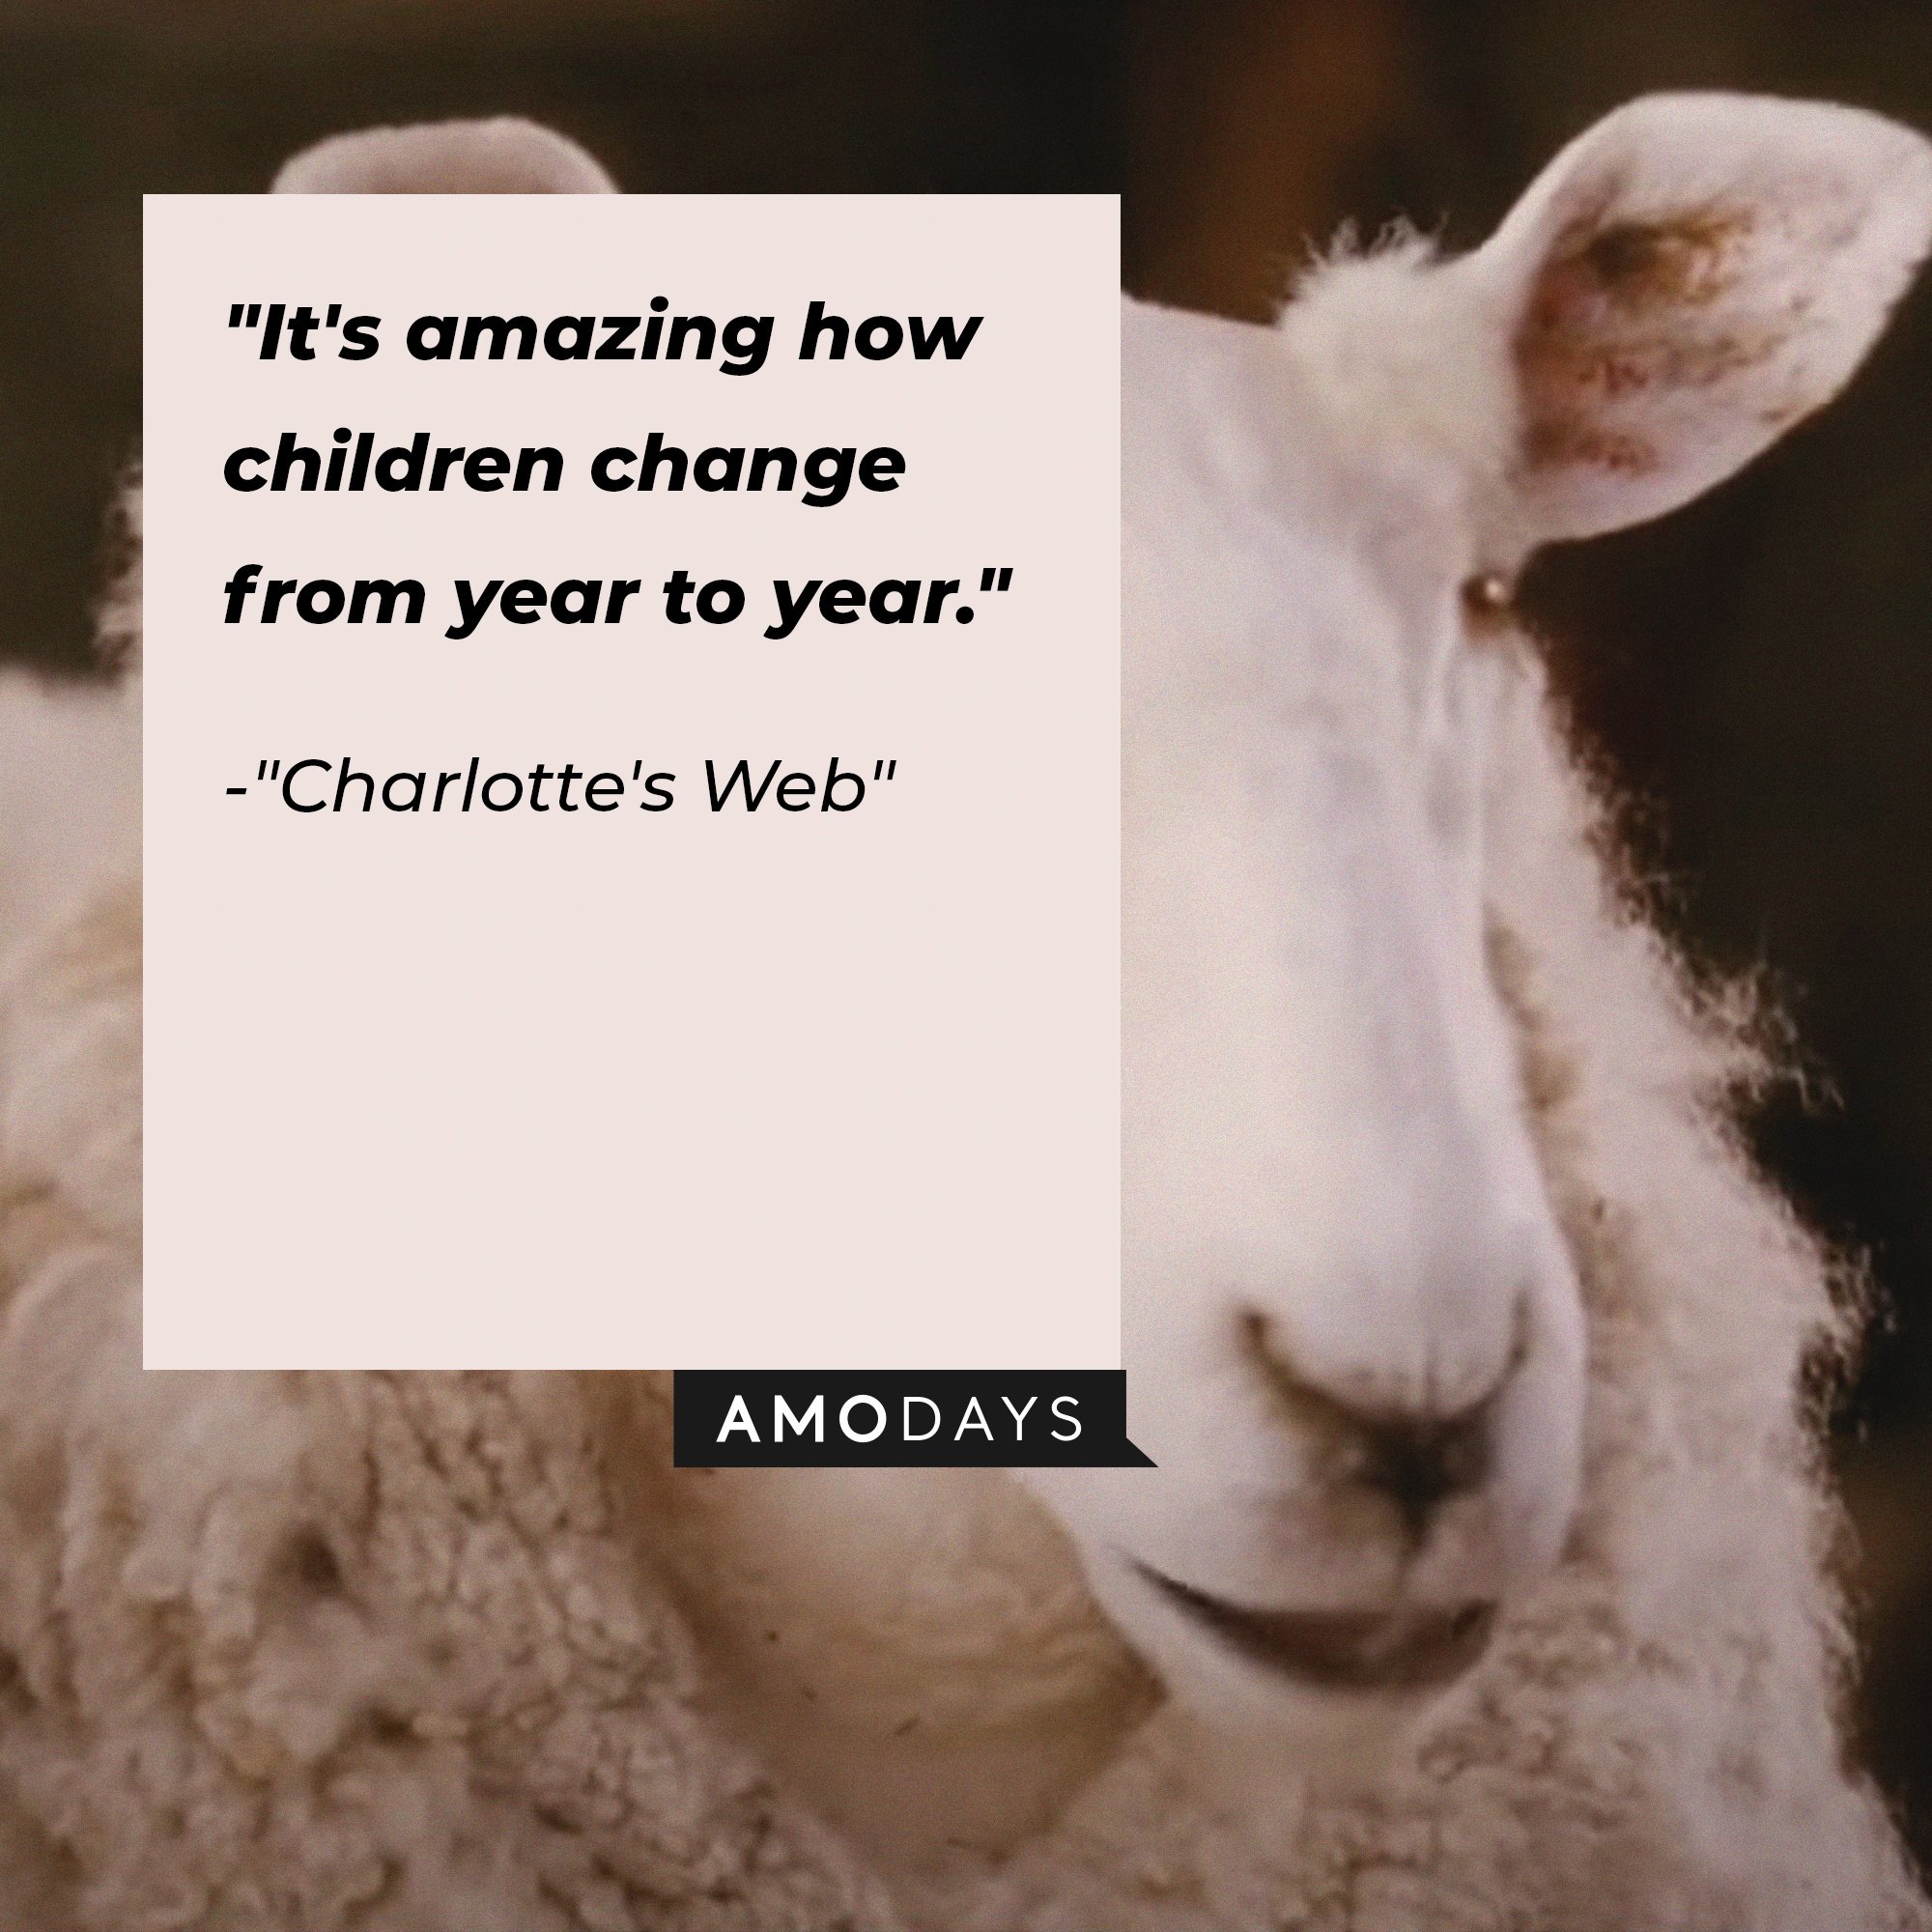 Charlotte's Web quote: "It's amazing how children change from year to year." | Image: AmoDays